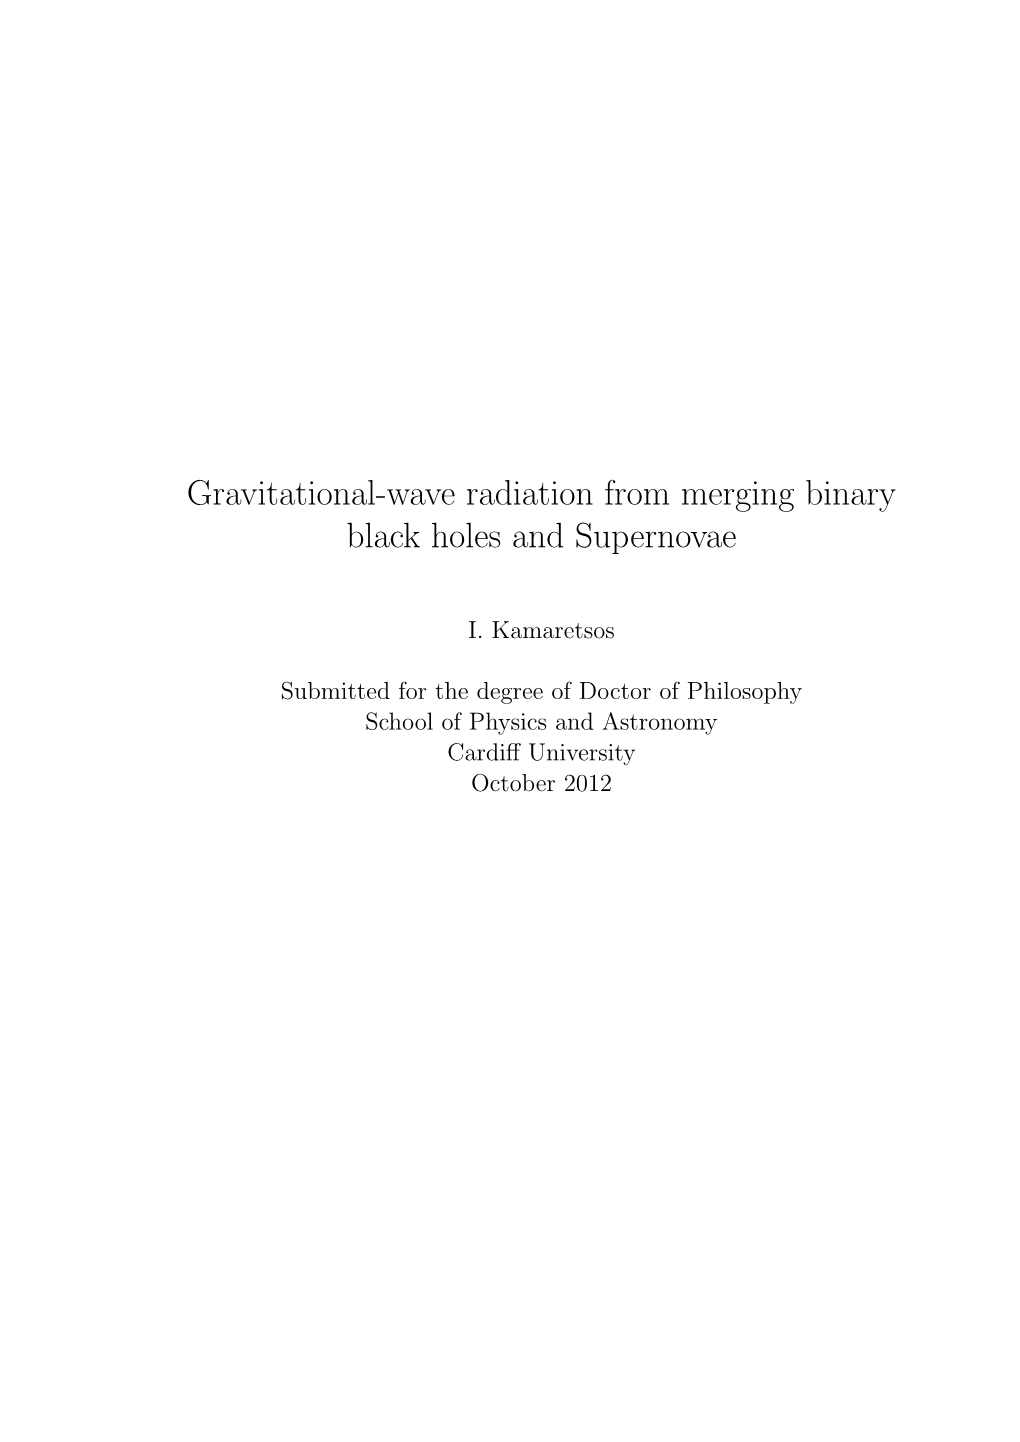 Gravitational-Wave Radiation from Merging Binary Black Holes and Supernovae